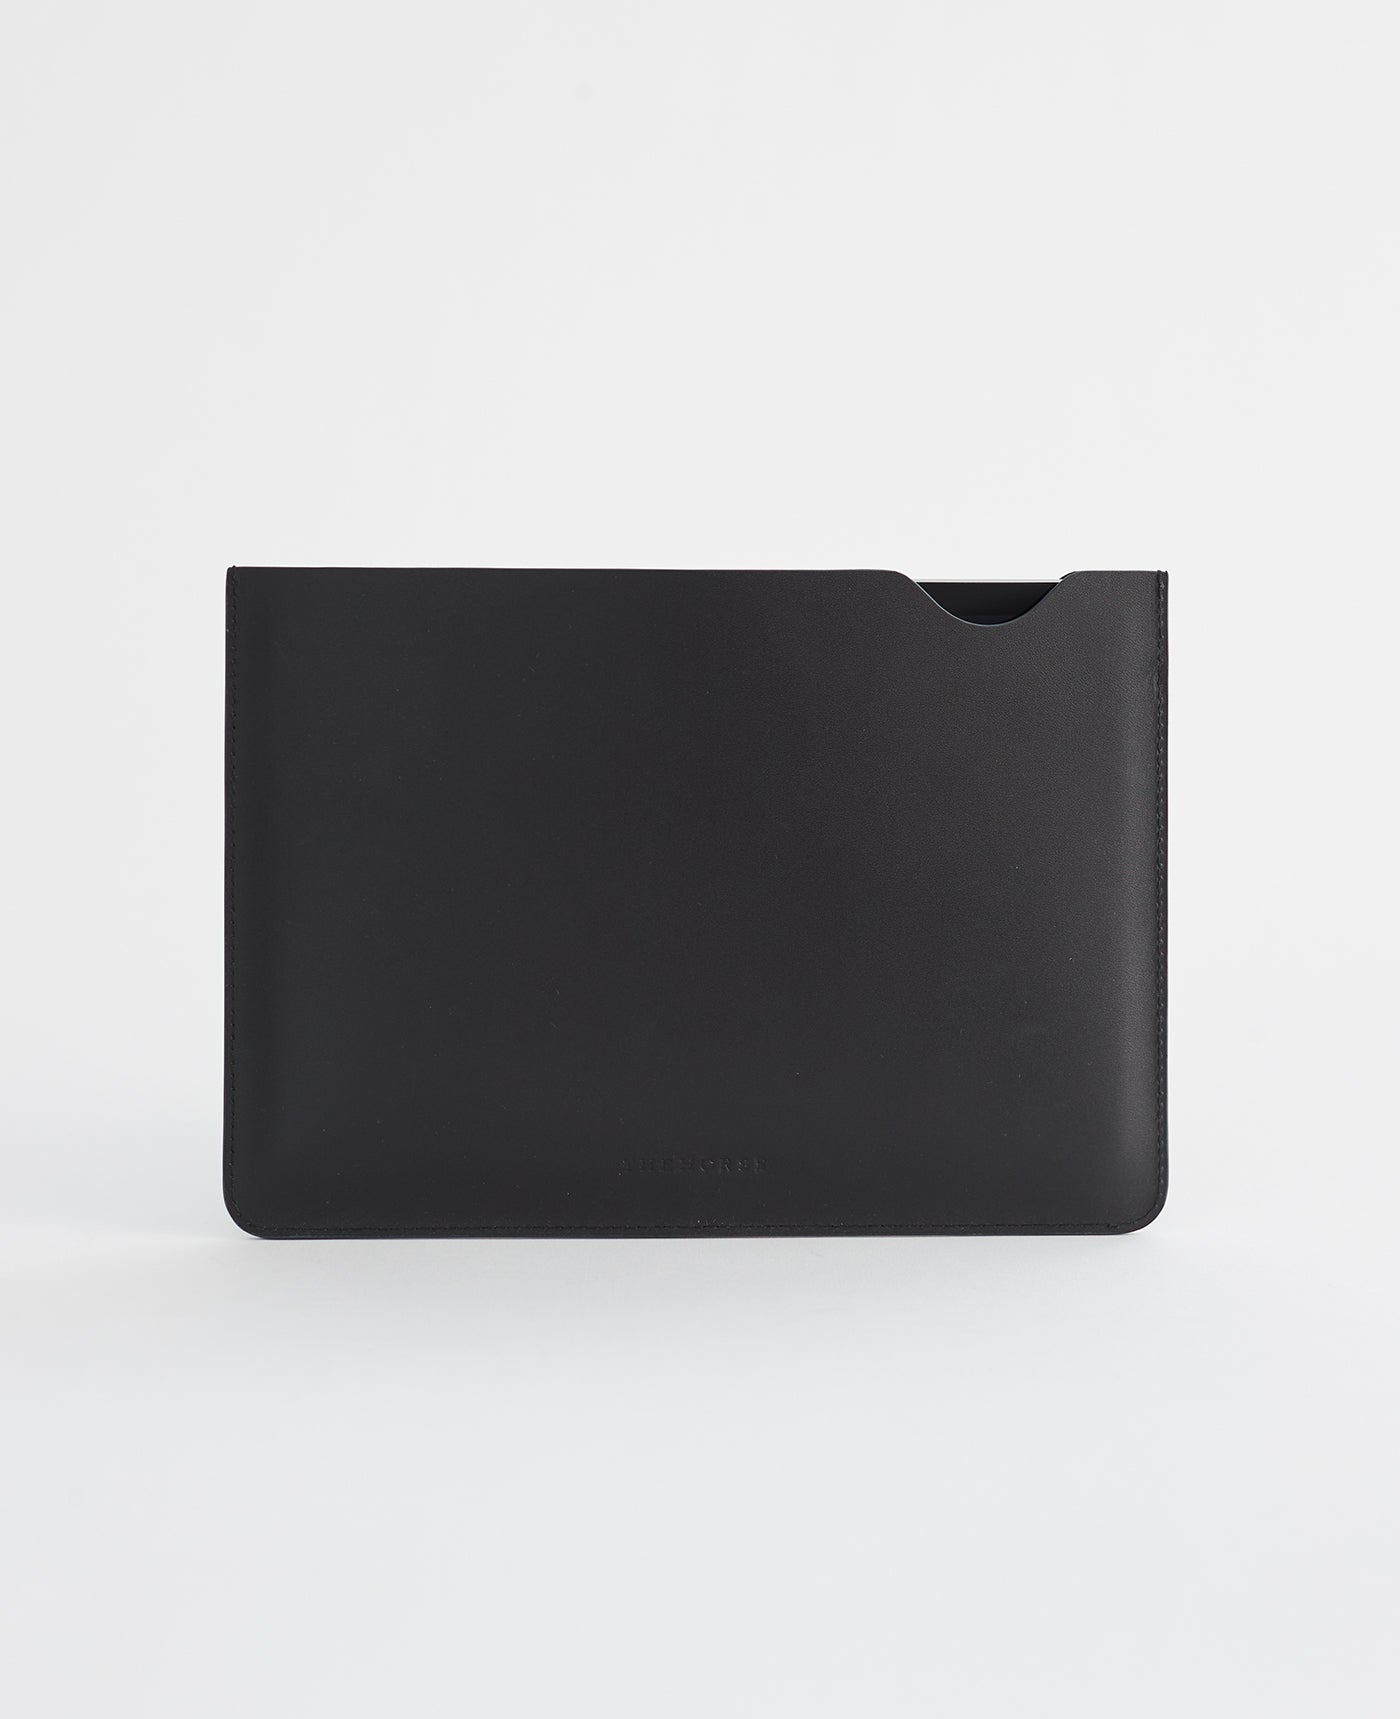 iPad Mini Leather Sleeve in Black by The Horse®